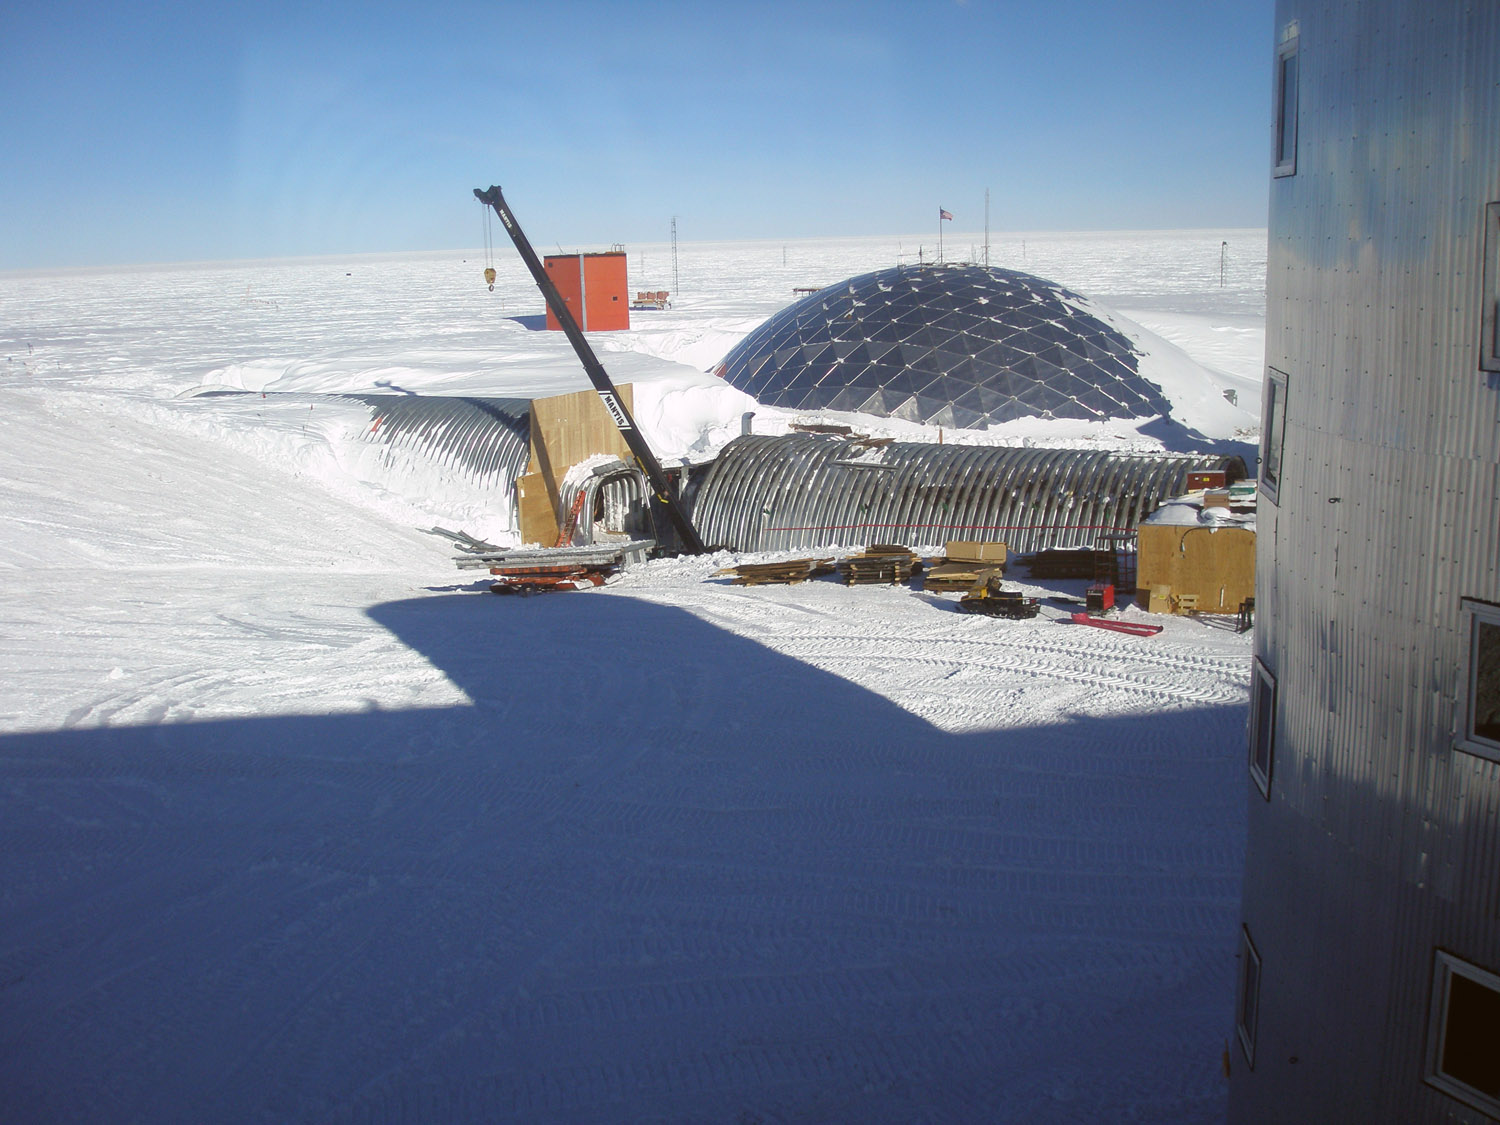 South Pole Dome - Demolition of the Old Entrance - 1